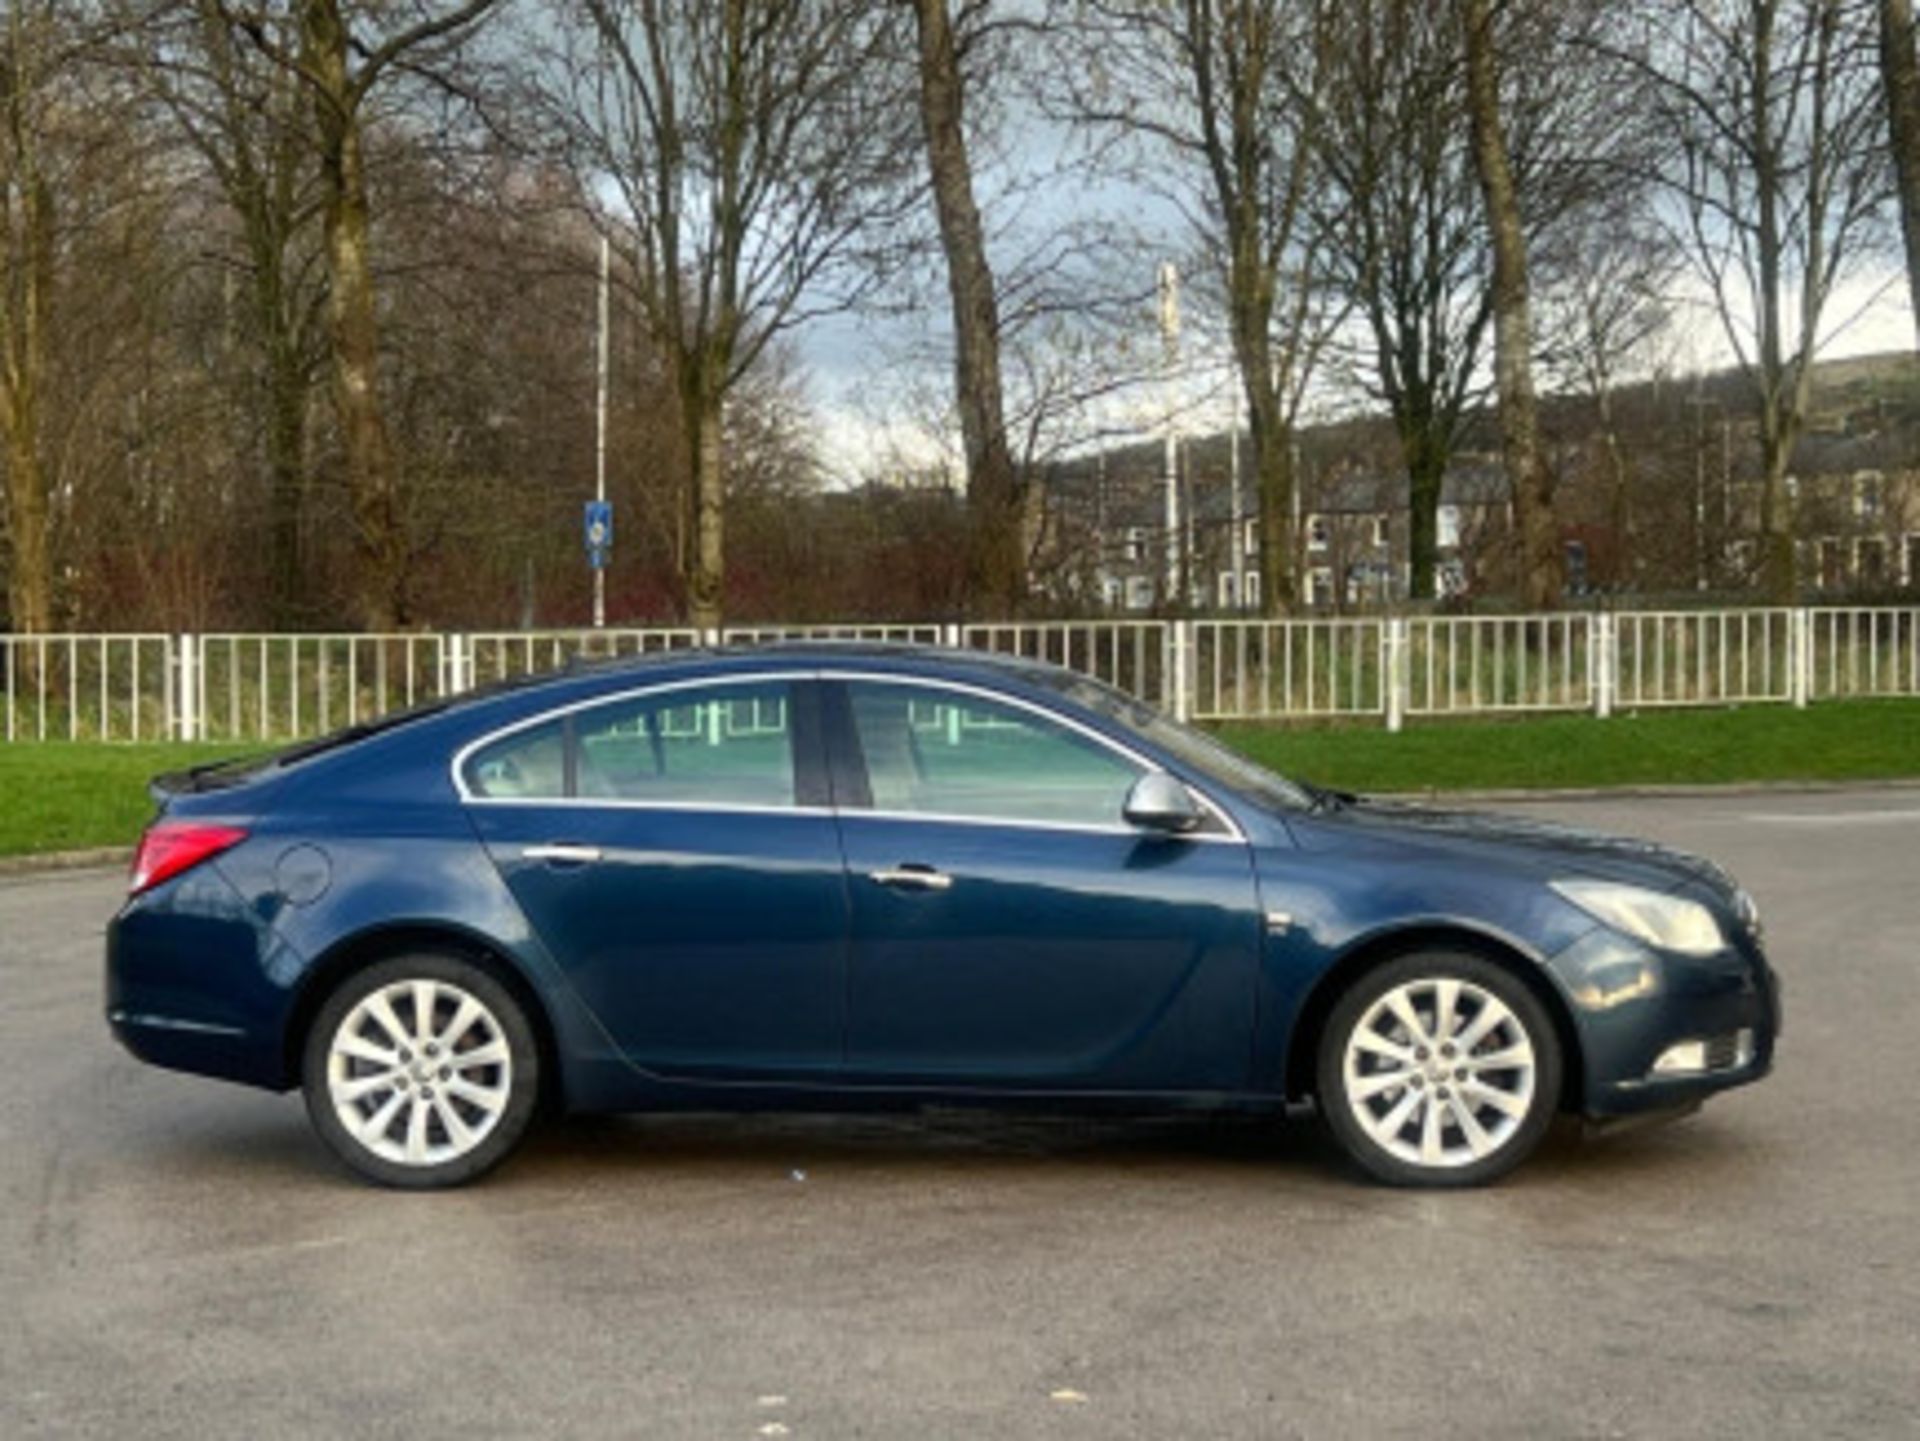 2012 VAUXHALL INSIGNIA 2.0 CDTI ELITE AUTO EURO 5 - DISCOVER EXCELLENCE >>--NO VAT ON HAMMER--<< - Image 37 of 79